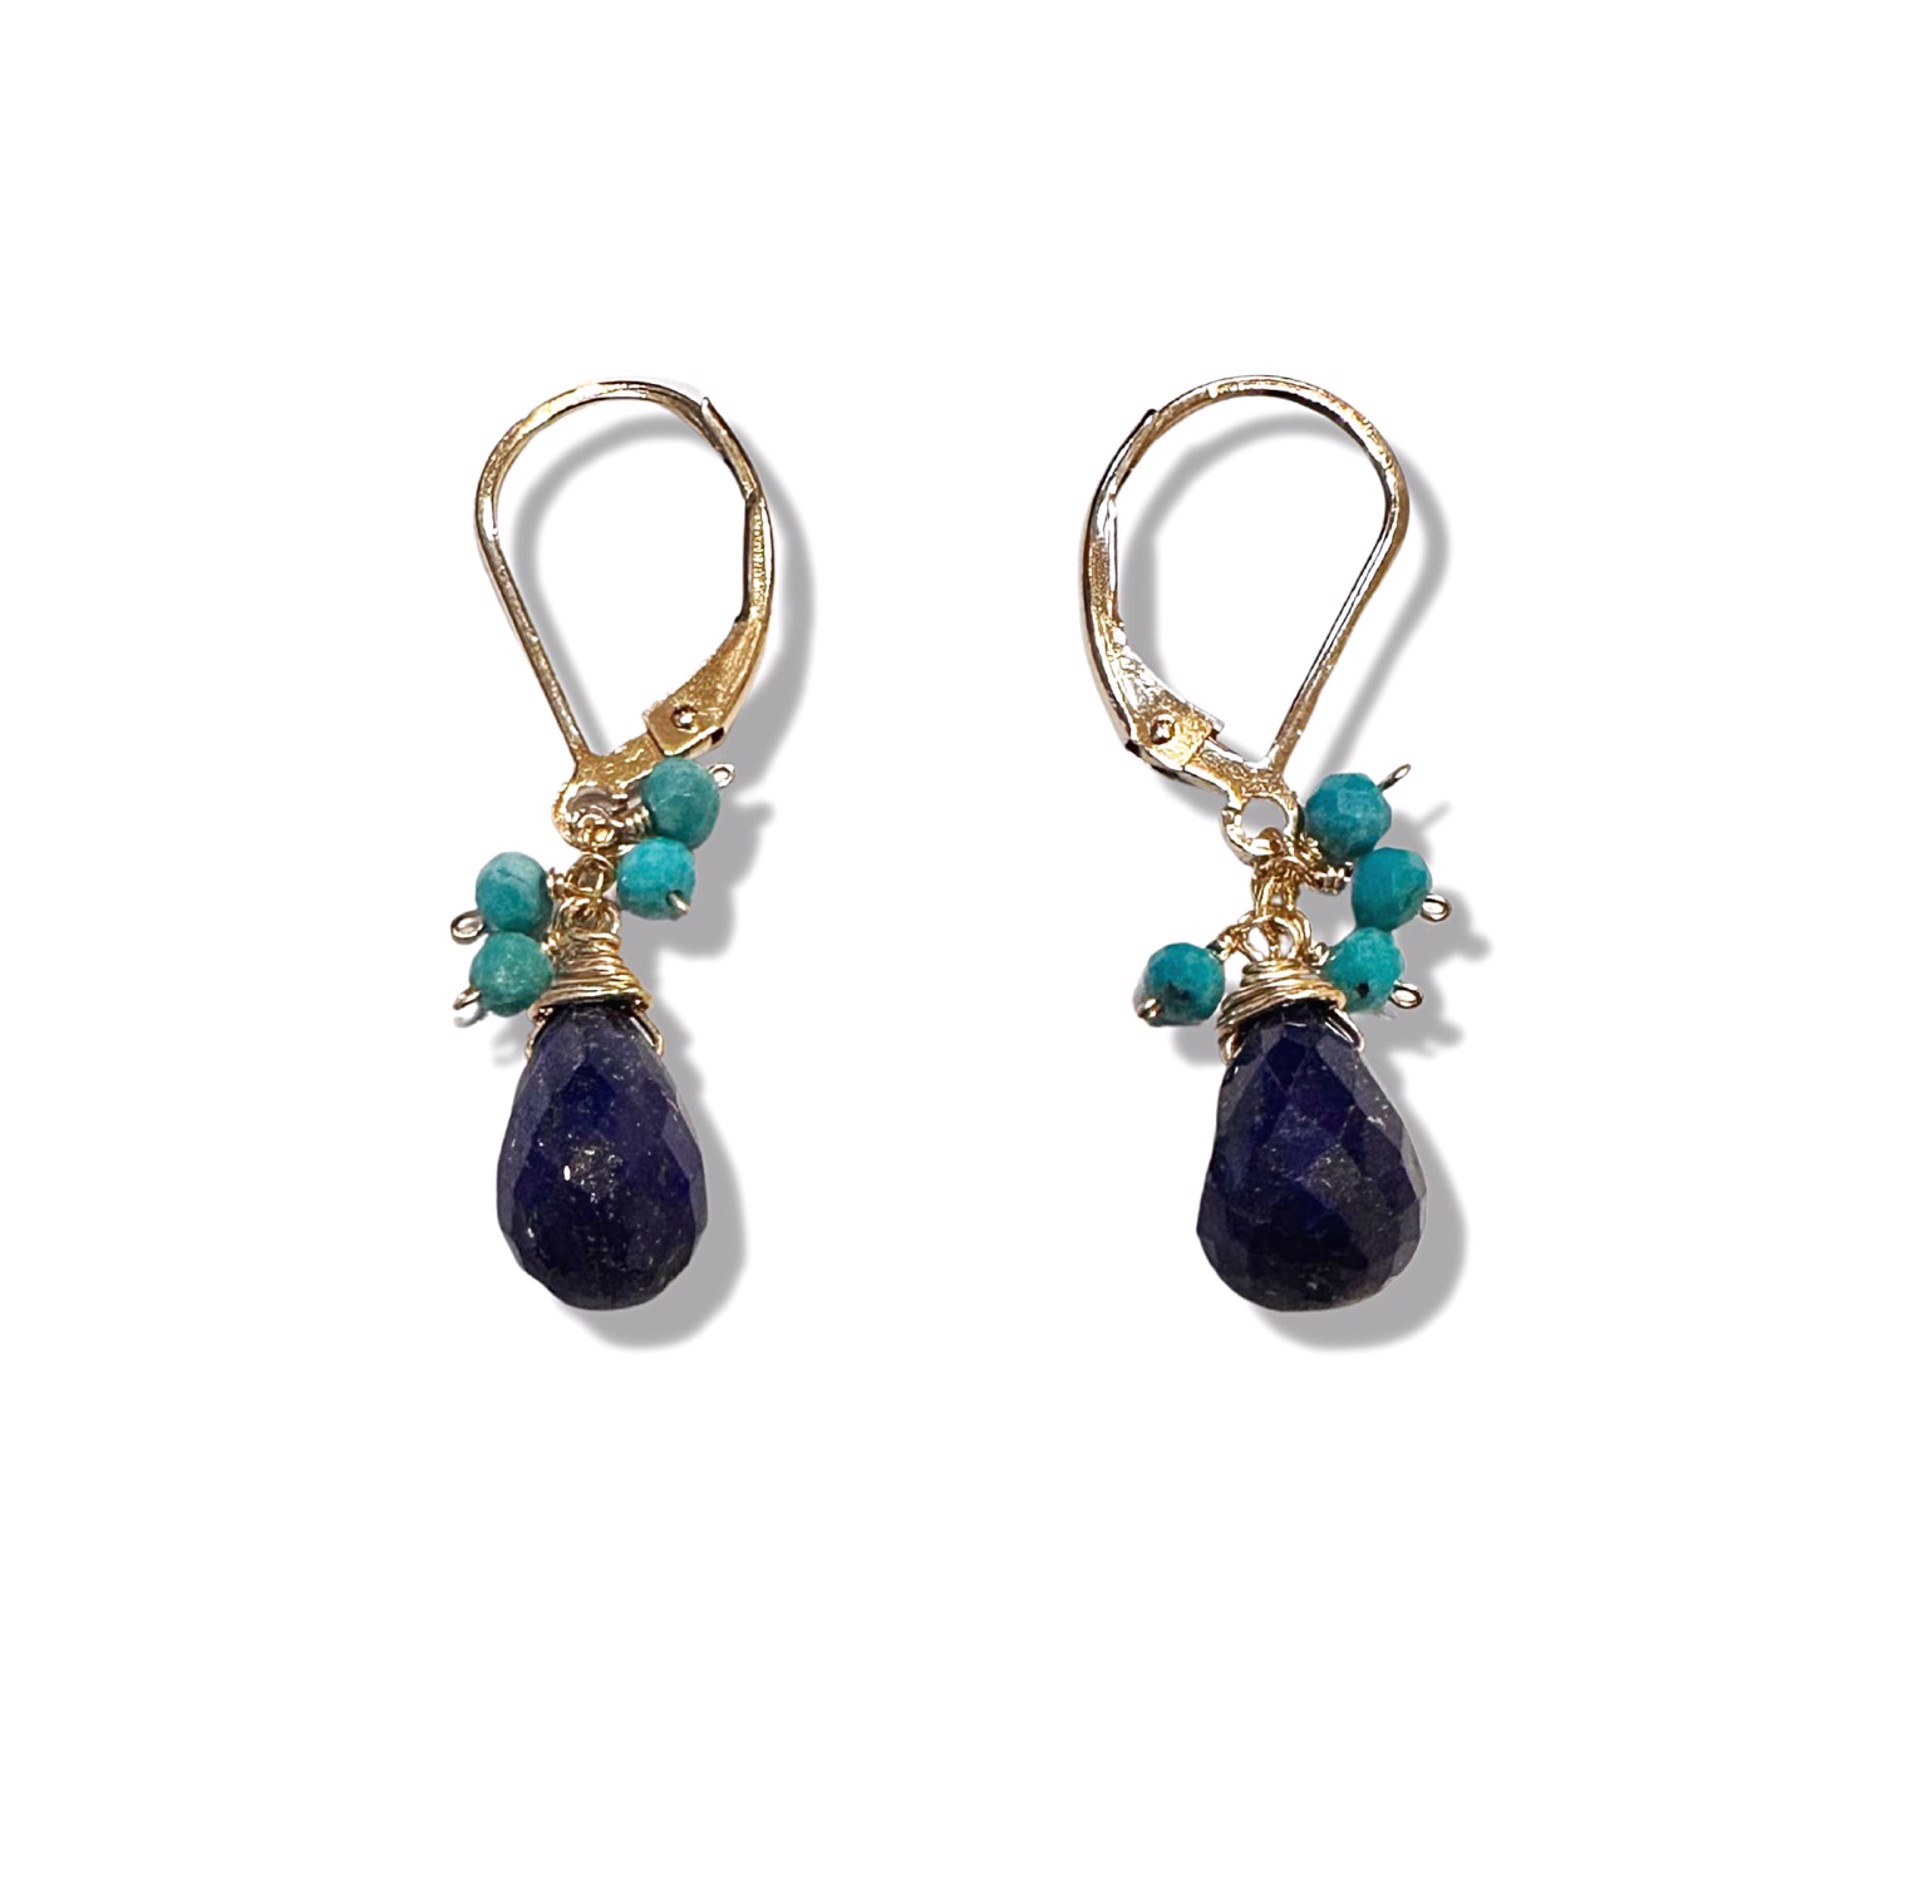 Earrings - Turquoise and Lapis Drops with 14K Gold Filling by Julia Balestracci